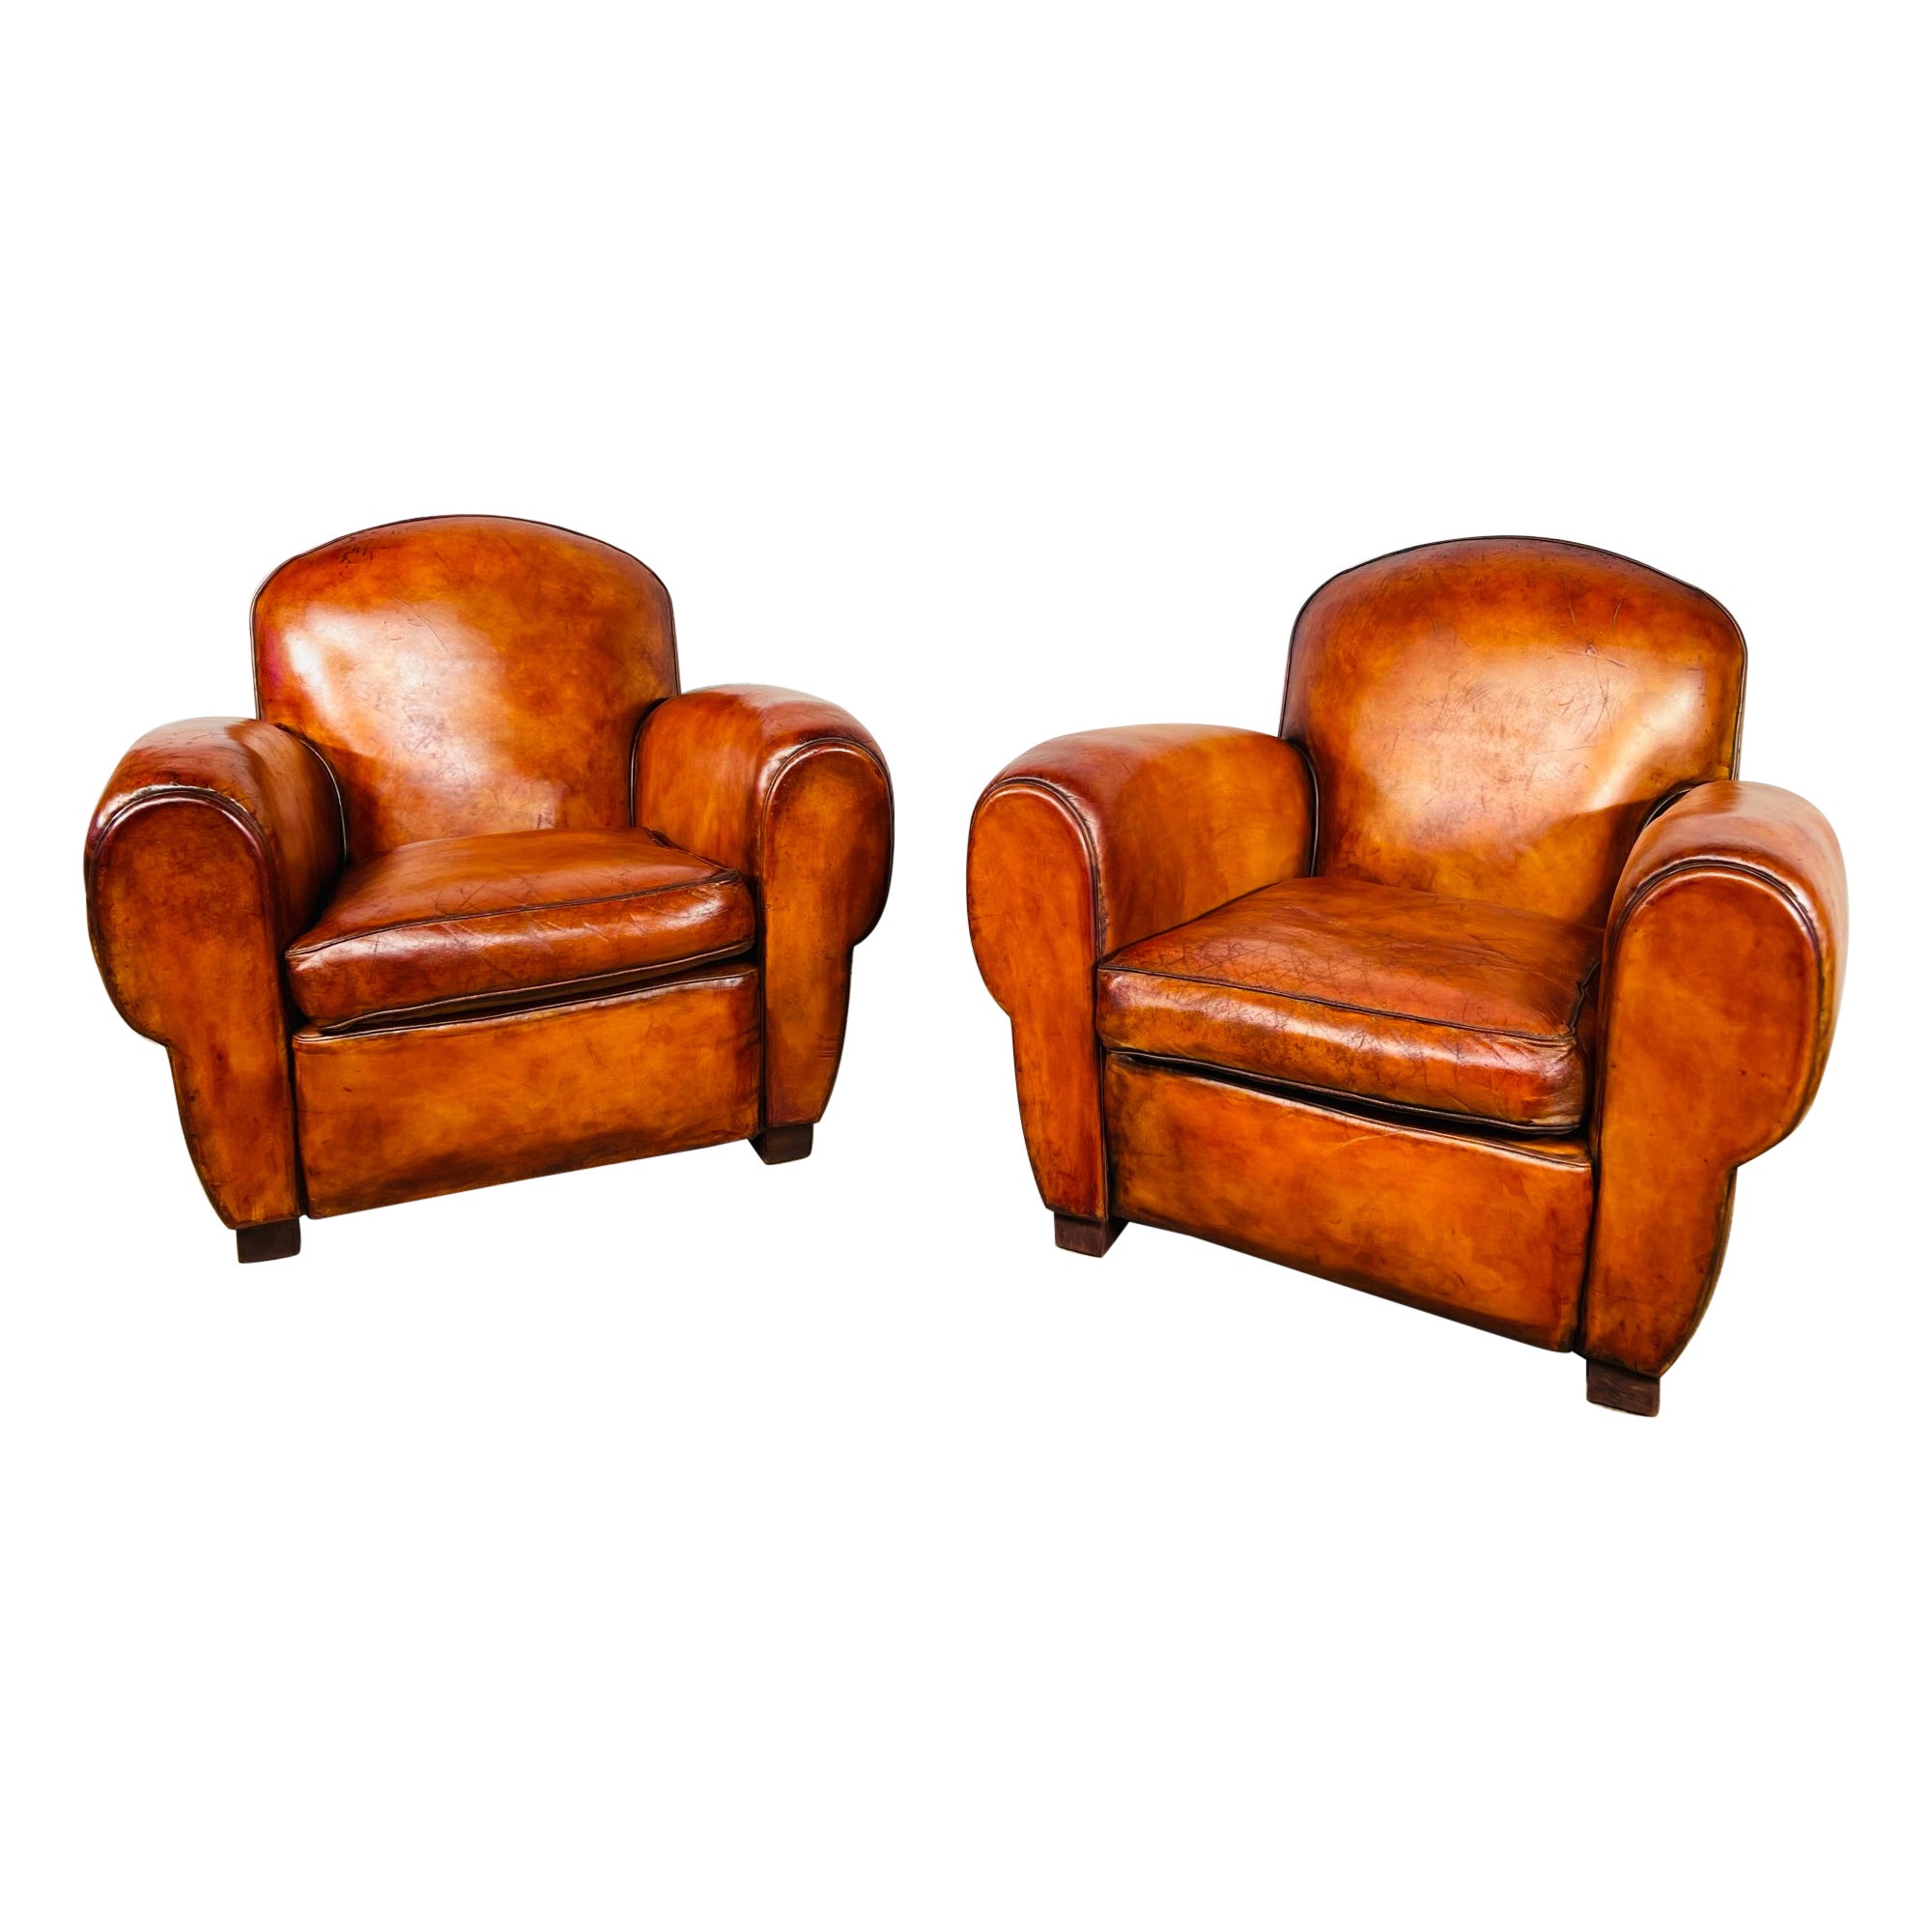 Stunning Pair of Leather French Club Chairs circa 1930 Patinated Cognac Color For Sale